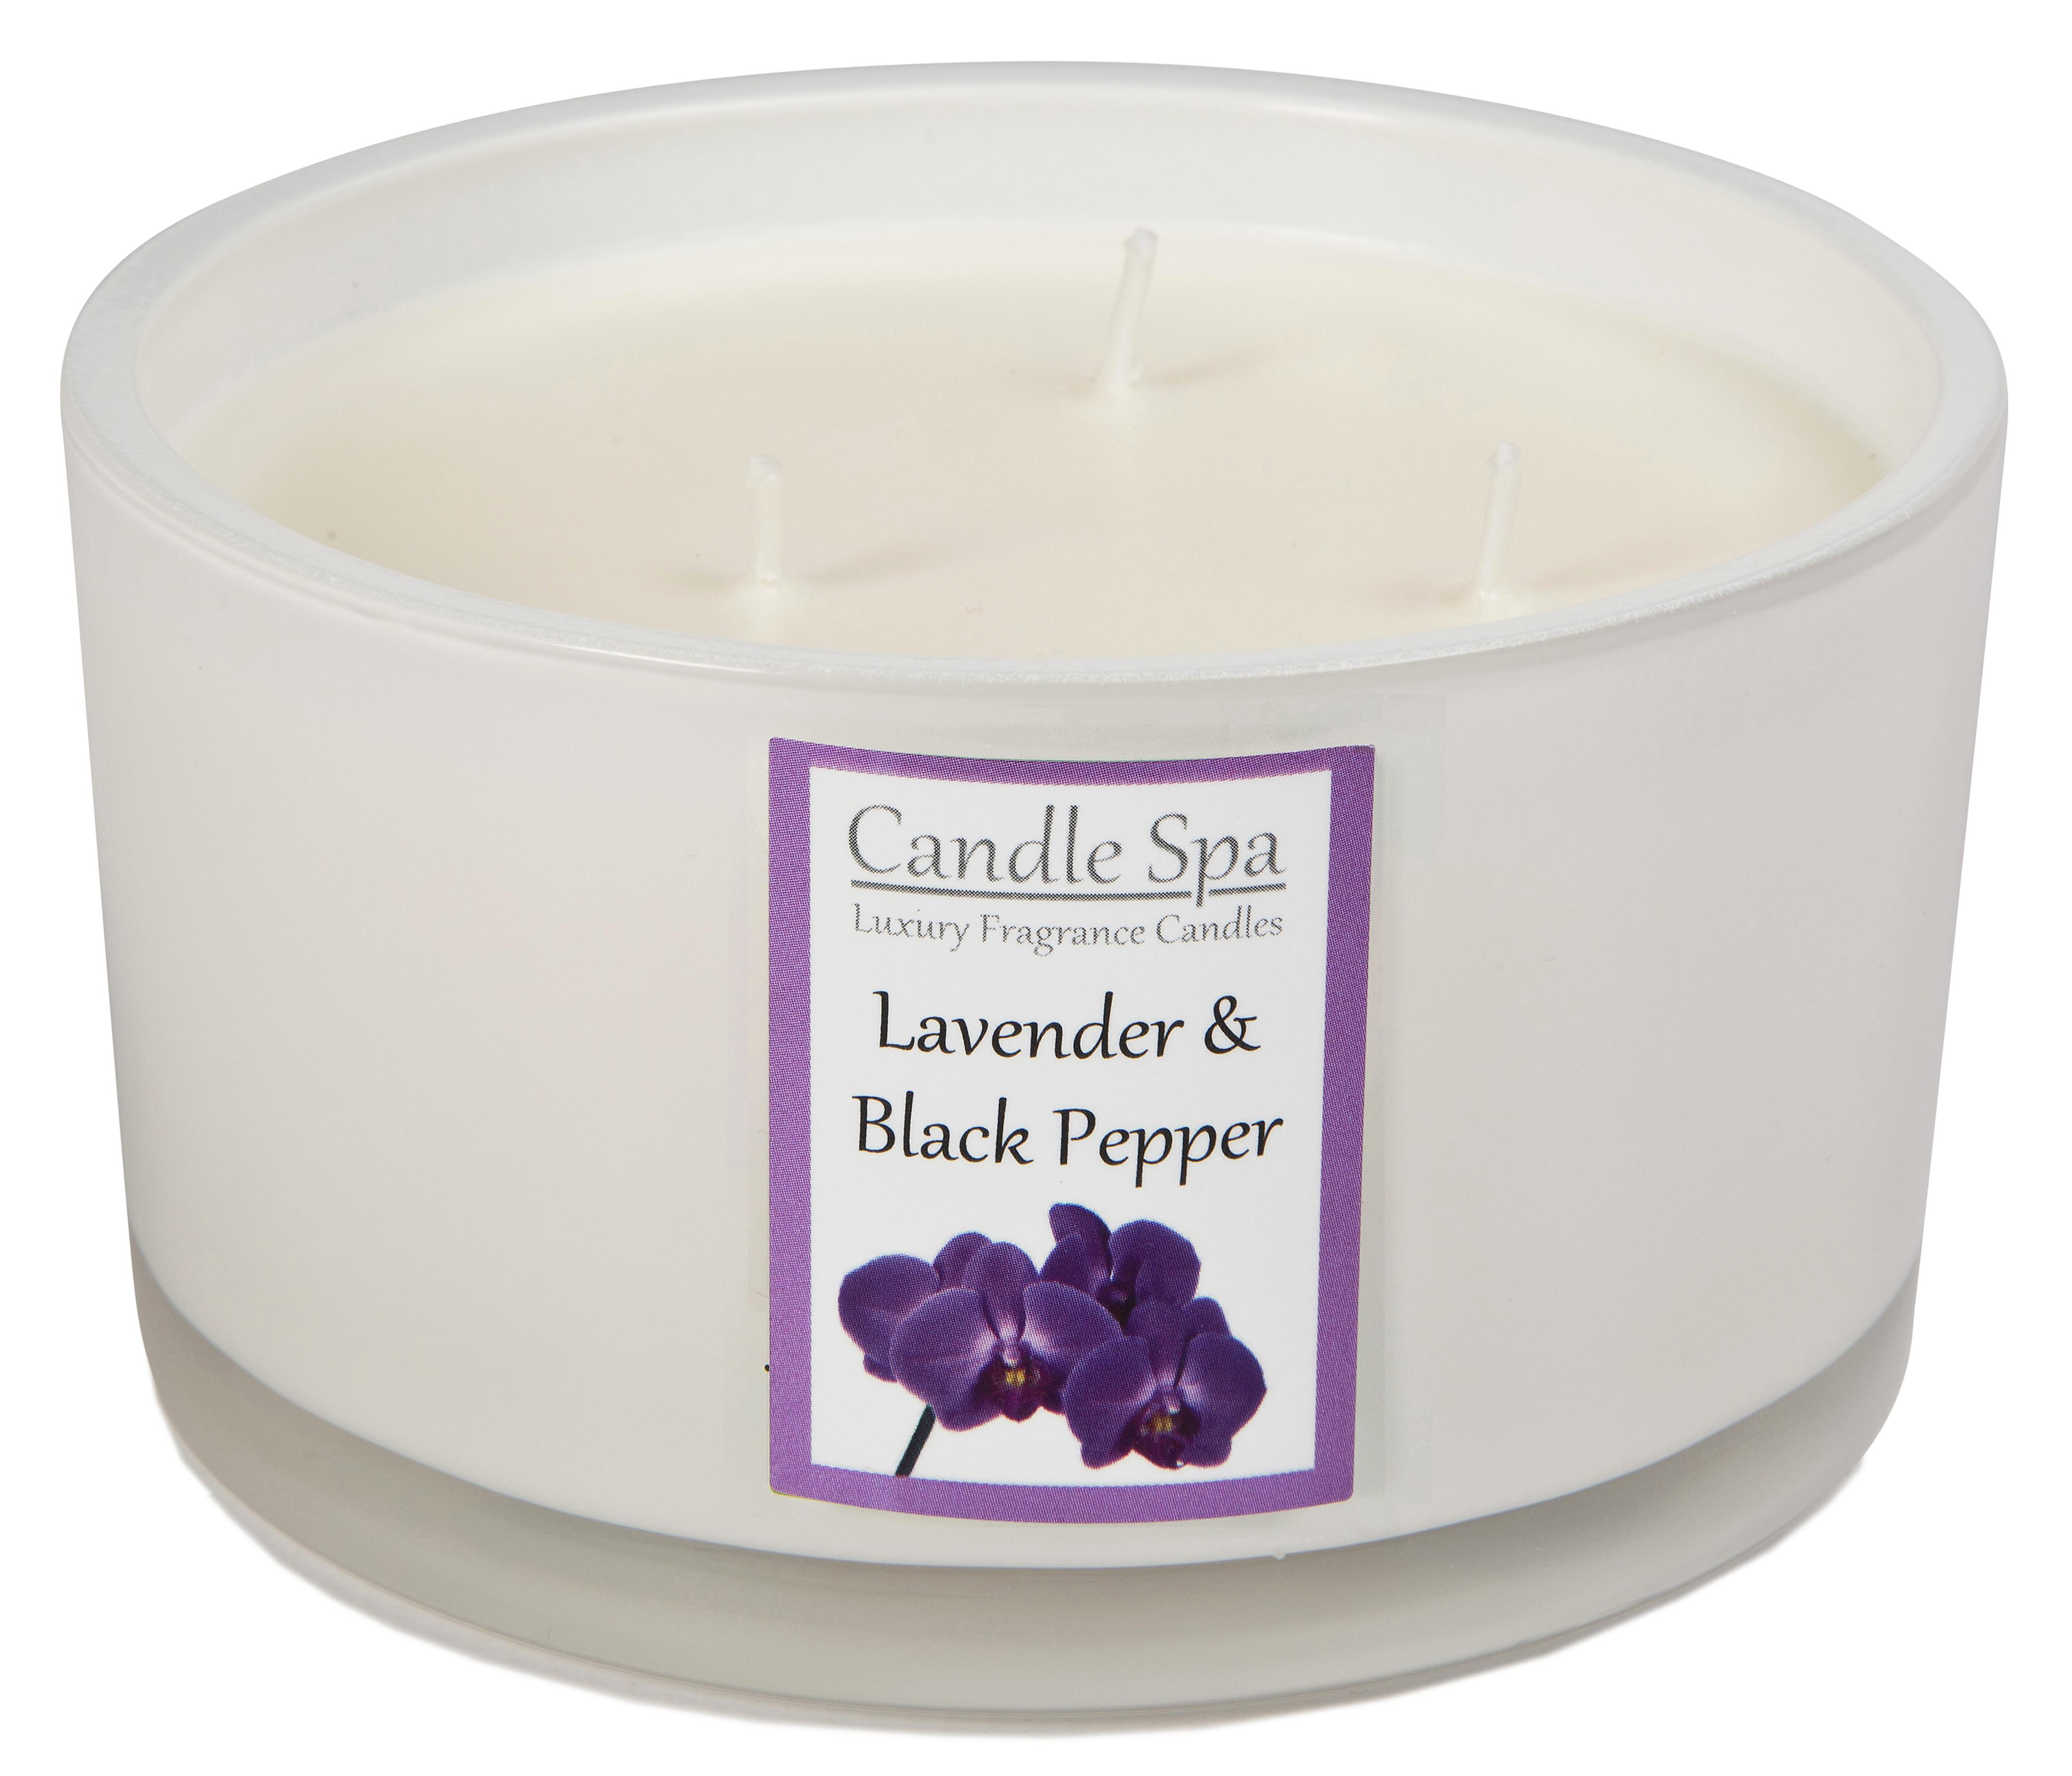 Candle Spa Luxury 3-Wick Candle - Lavender & Black Pepper